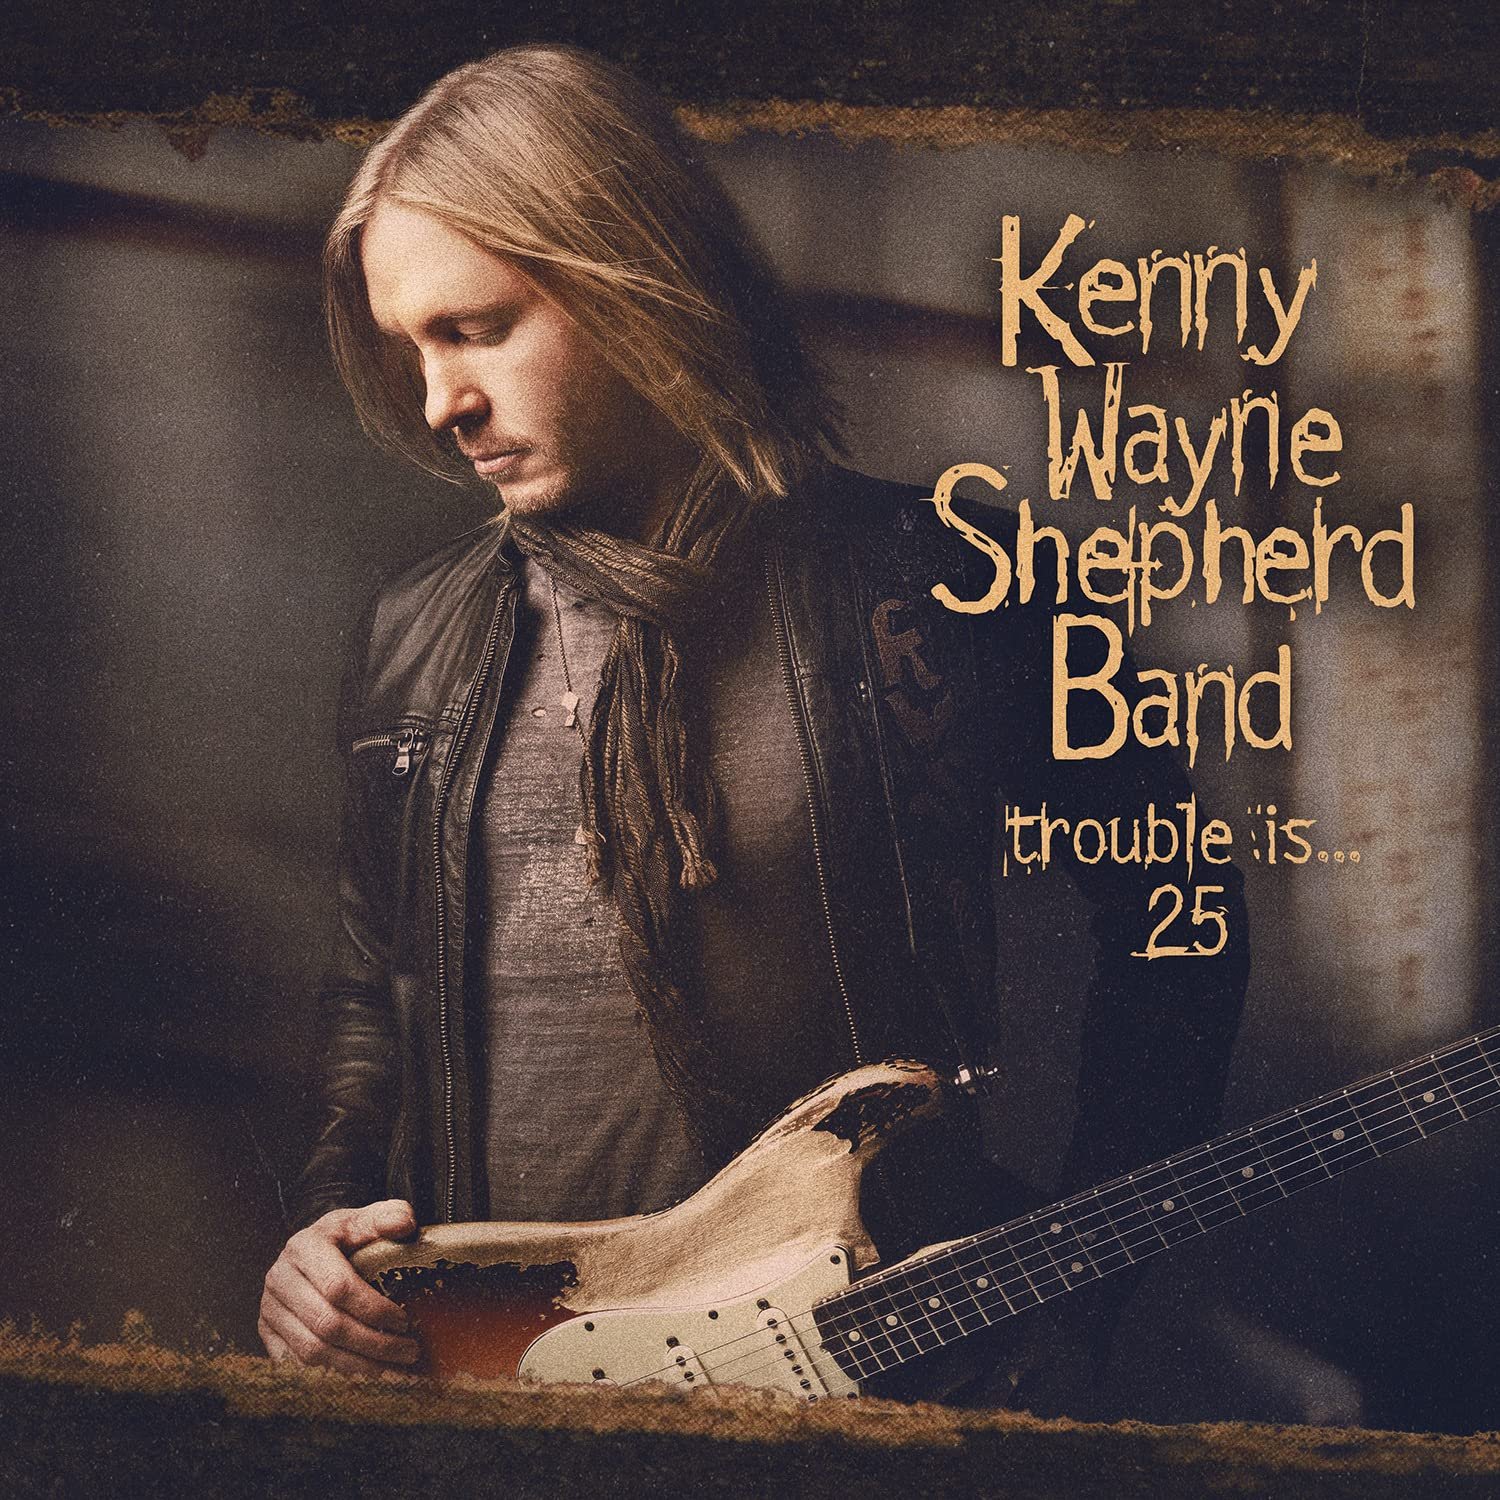 Kenny Wayne Shepherd Band - Trouble Is... 25 [Dolby Atmos]